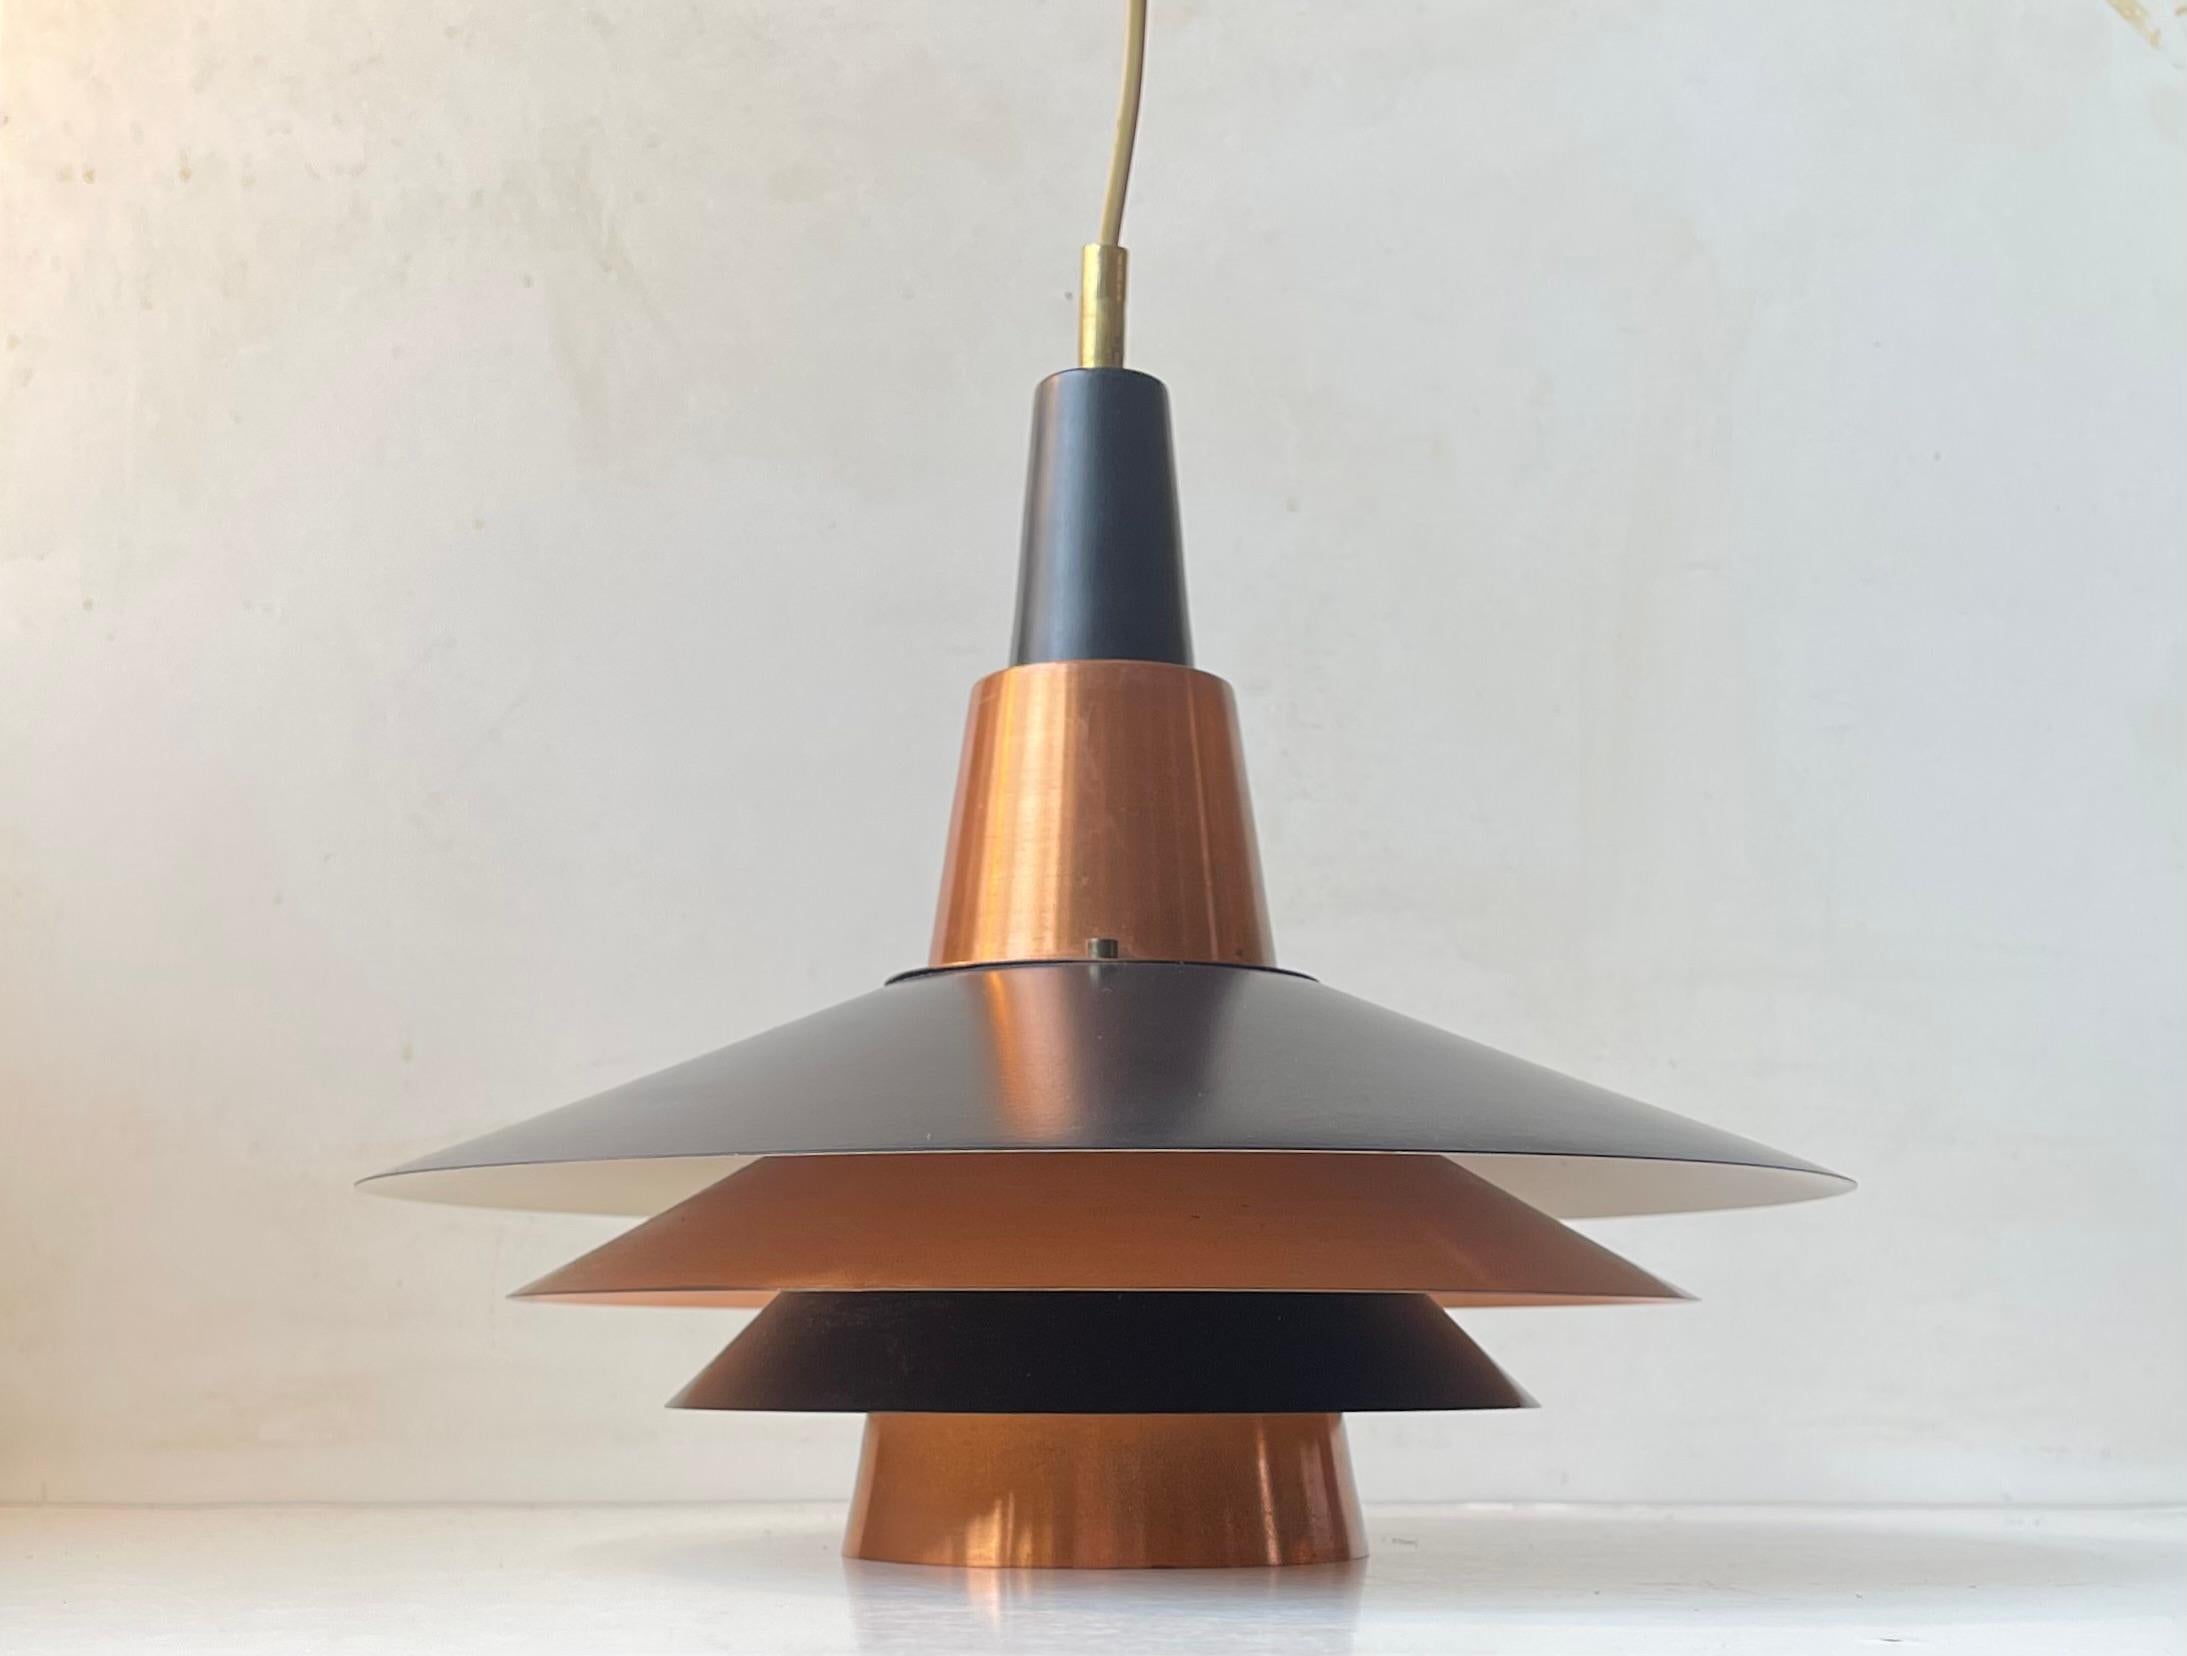 A tiered - multi-shaded Stilnovo inspired pendant lamp. Constructed from interchanging black aluminum shades and solid copper shades. Reminiscent in style to PH4 and PH5 by Poul Henningsen. It was designed and manufactured by Ernest Voss/Voss